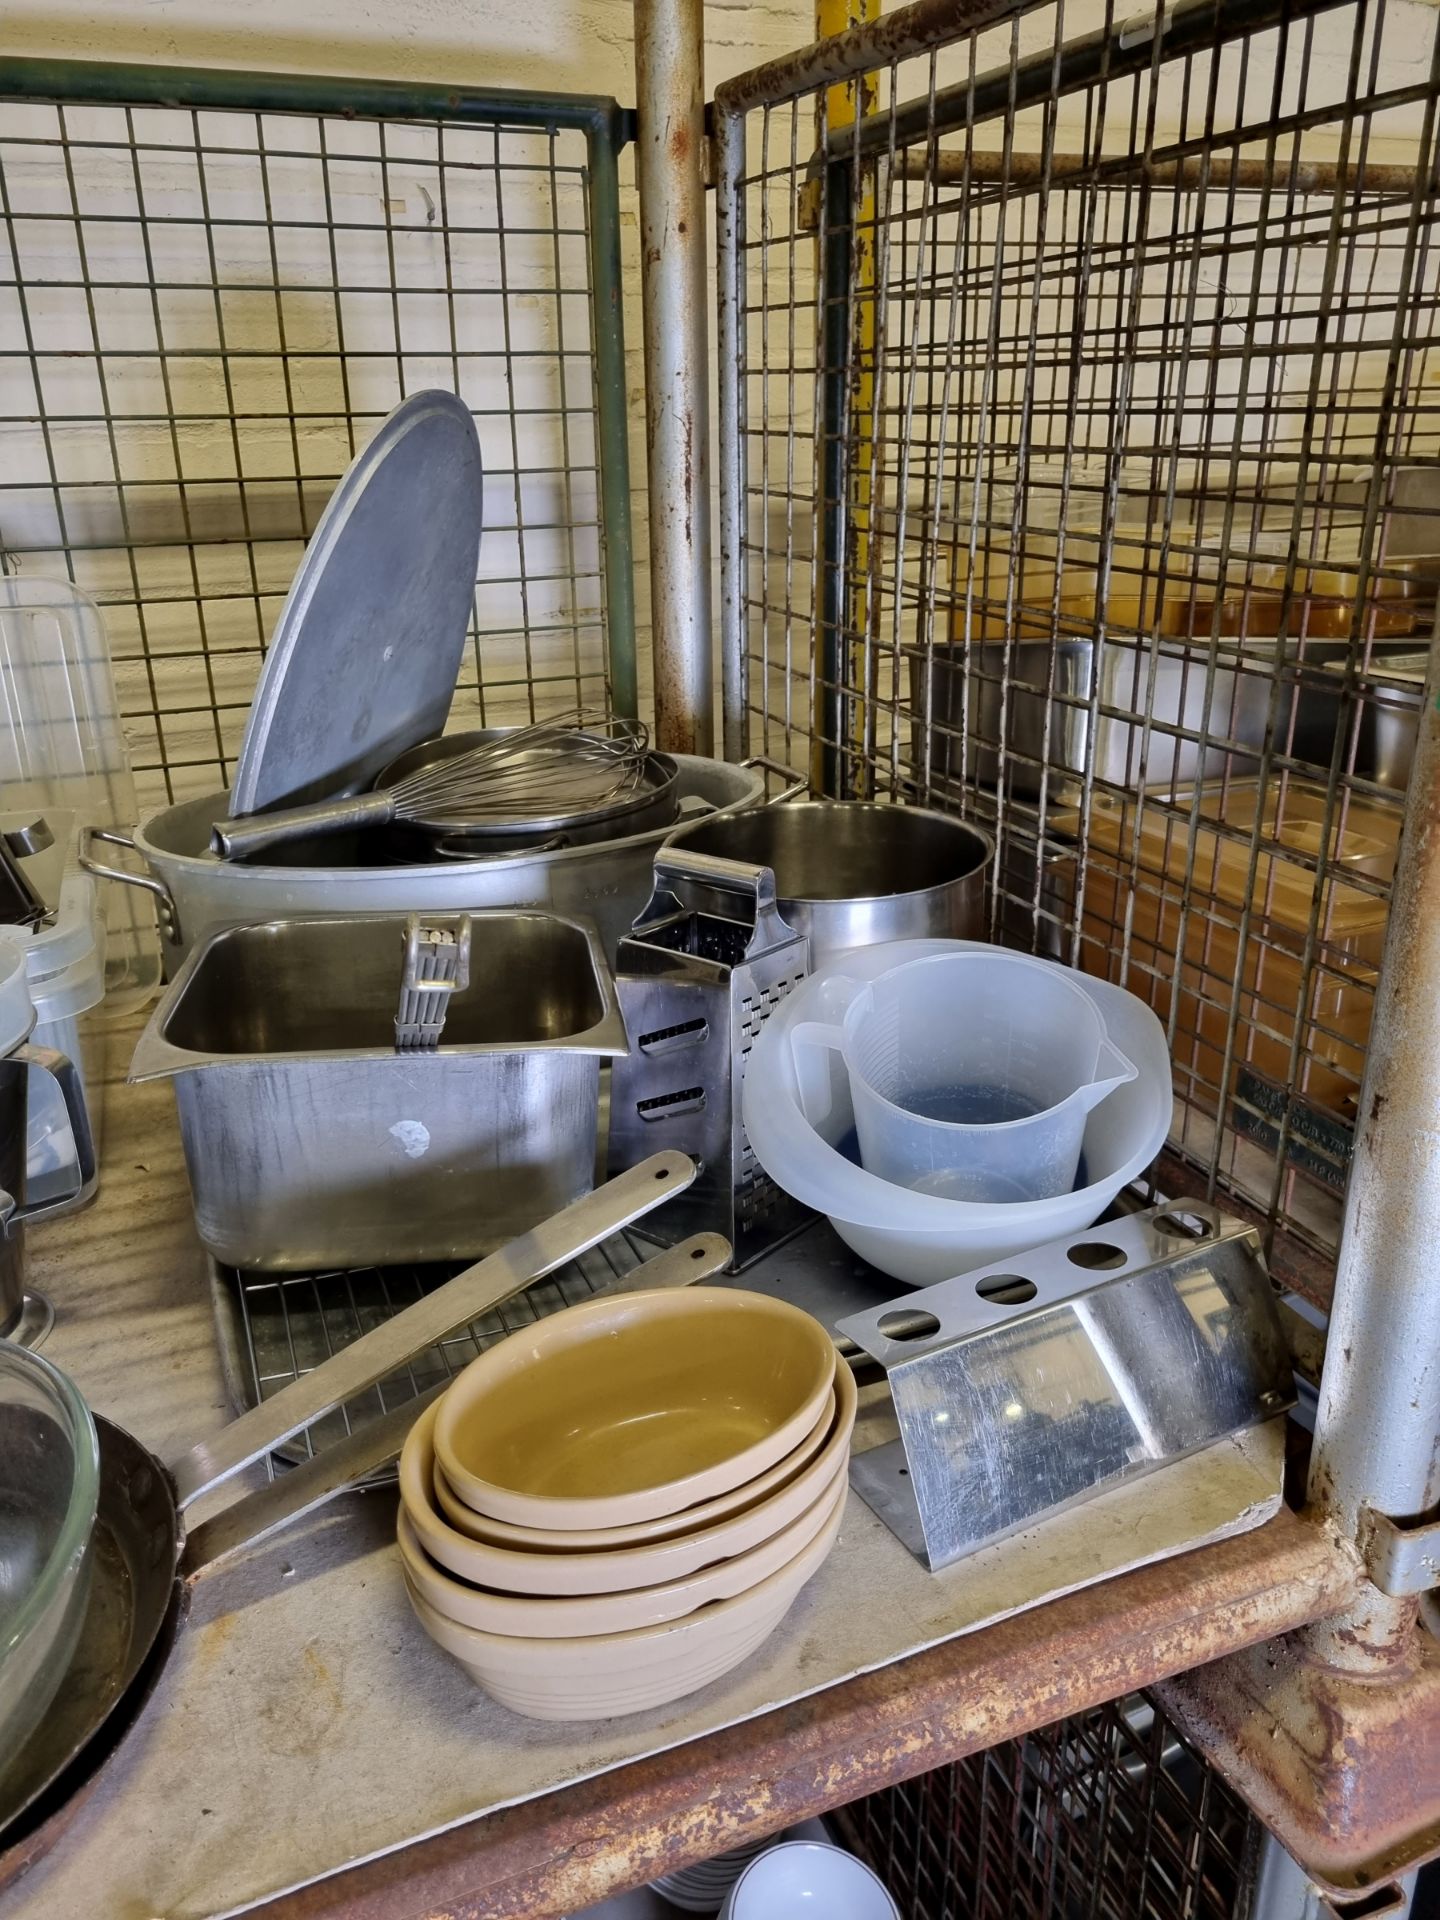 Catering equipment - pans, oven trays, mixing bowls, jugs, date stickers, frying pans and utensils - Image 2 of 6